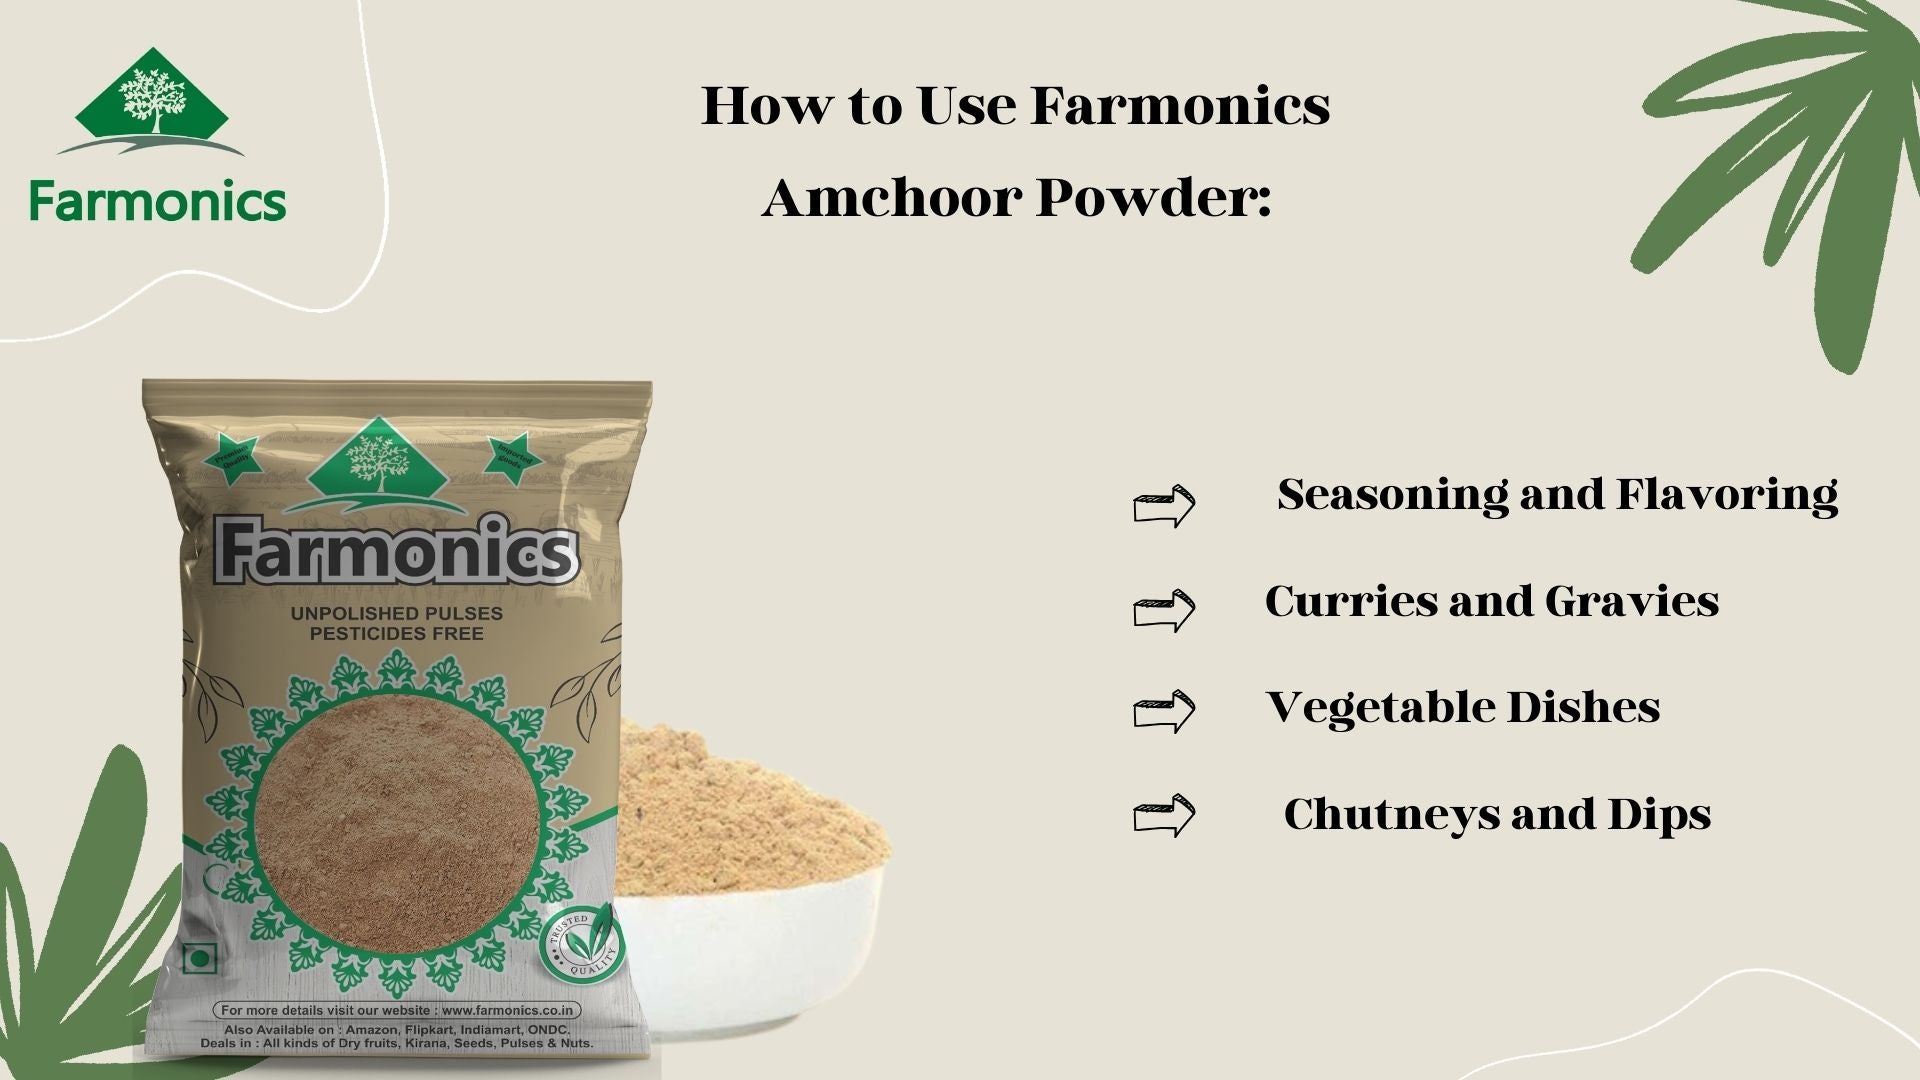 Let us know How to Use Farmonics Amchoor powder. You can use in Various ways like Seasoning and Flavoring, Curries and Gravies, Vegetable Dishes, Chutneys and Dips.